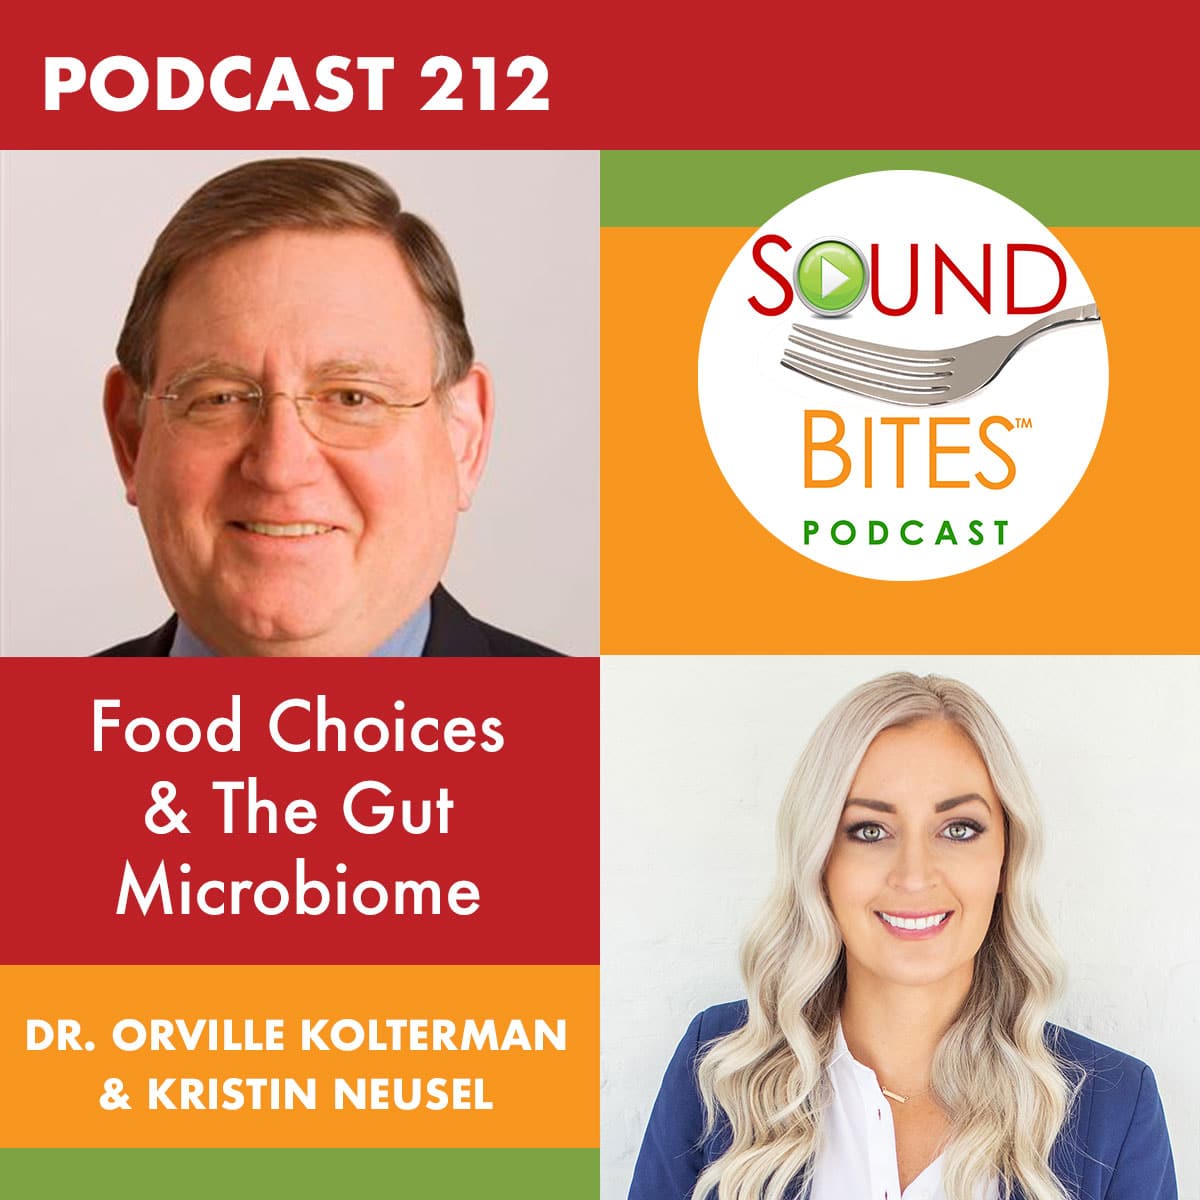 Podcast Episode 212: Food Choices & the Gut Microbiome: Managing Chronic Diseases Takes Guts – Dr. Orville Kolterman and Kristin Neusel